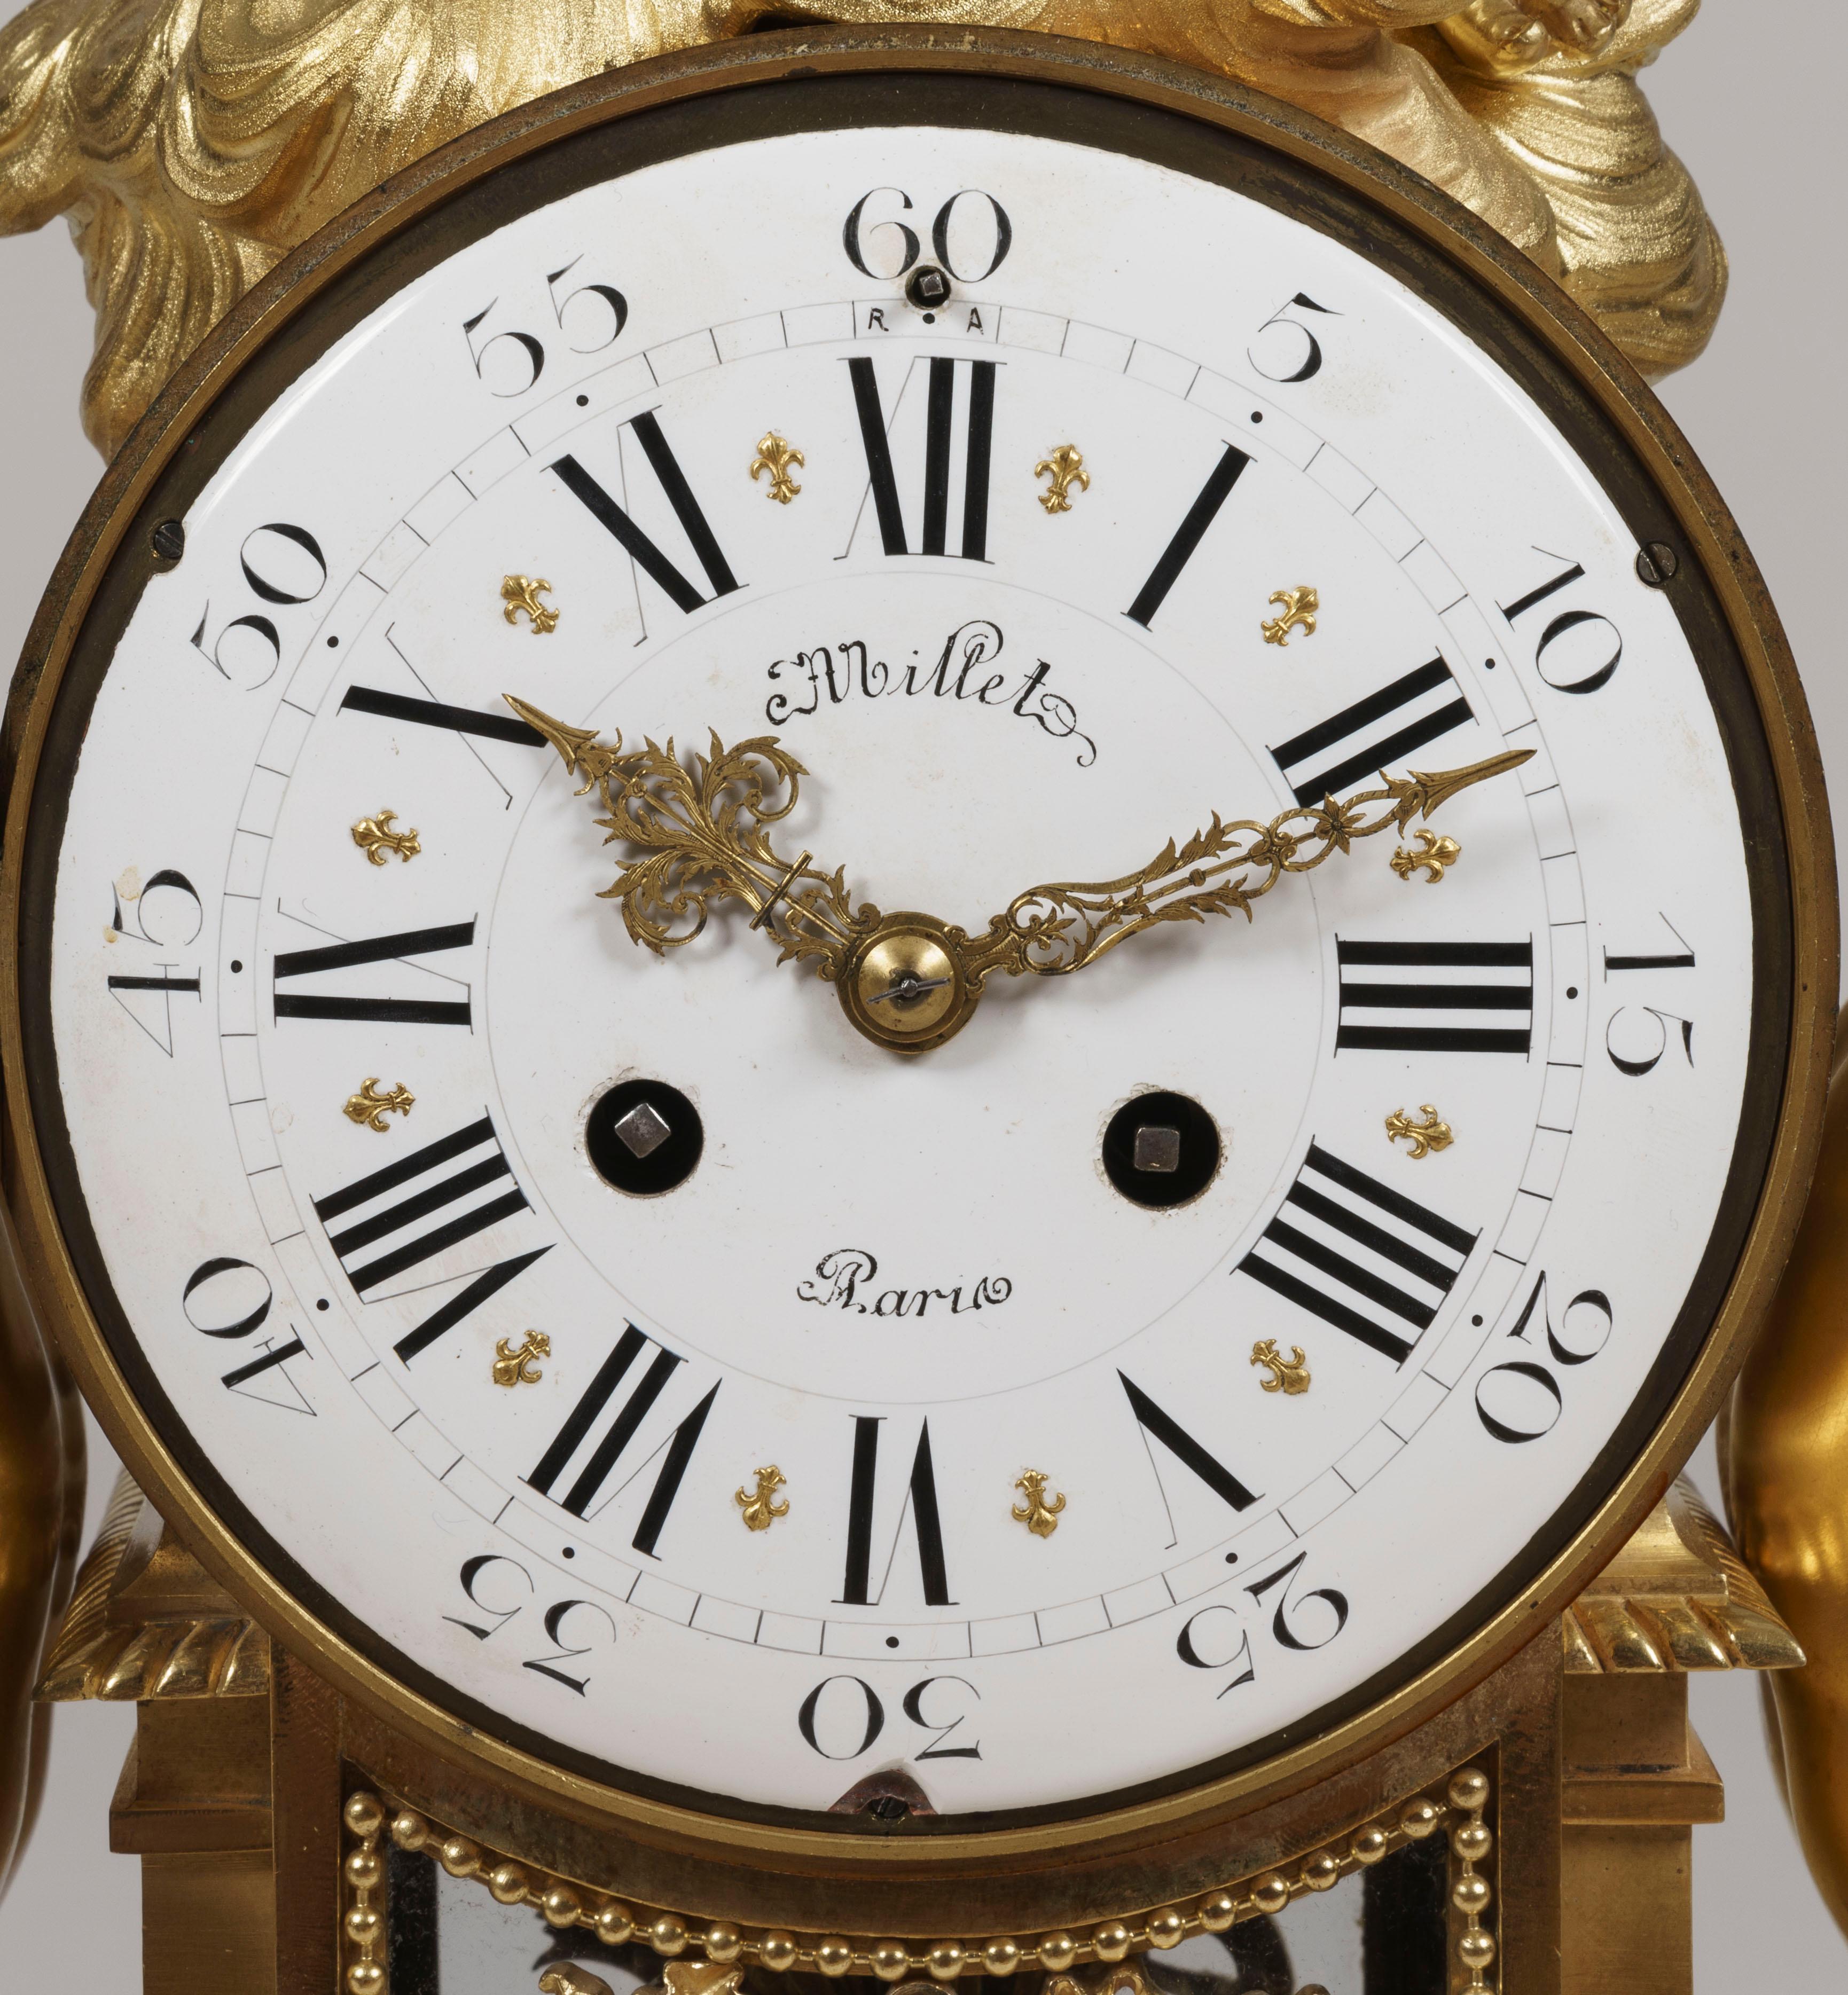 A mantle clock in the Louis XV manner by Millet of Paris

Constructed in white Carrara marble and gilt bronze; the rectangular form base having bowed ends, rises from gilt toupie feet, and has opposed gilt sphinxes and gilt bronze foliate mounts